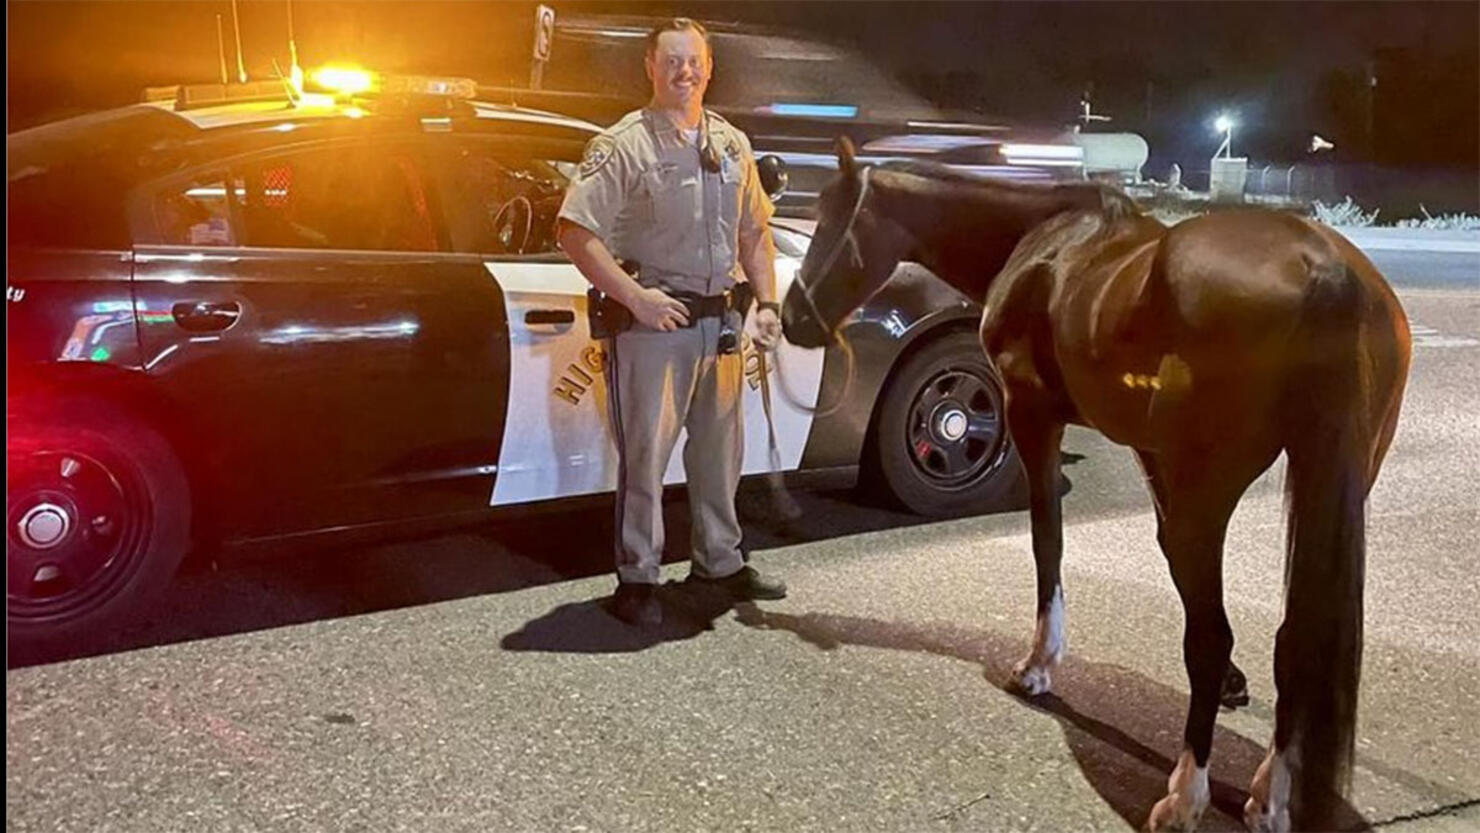 Officer Brackett Poses With Horse After Arresting Rider For DUI